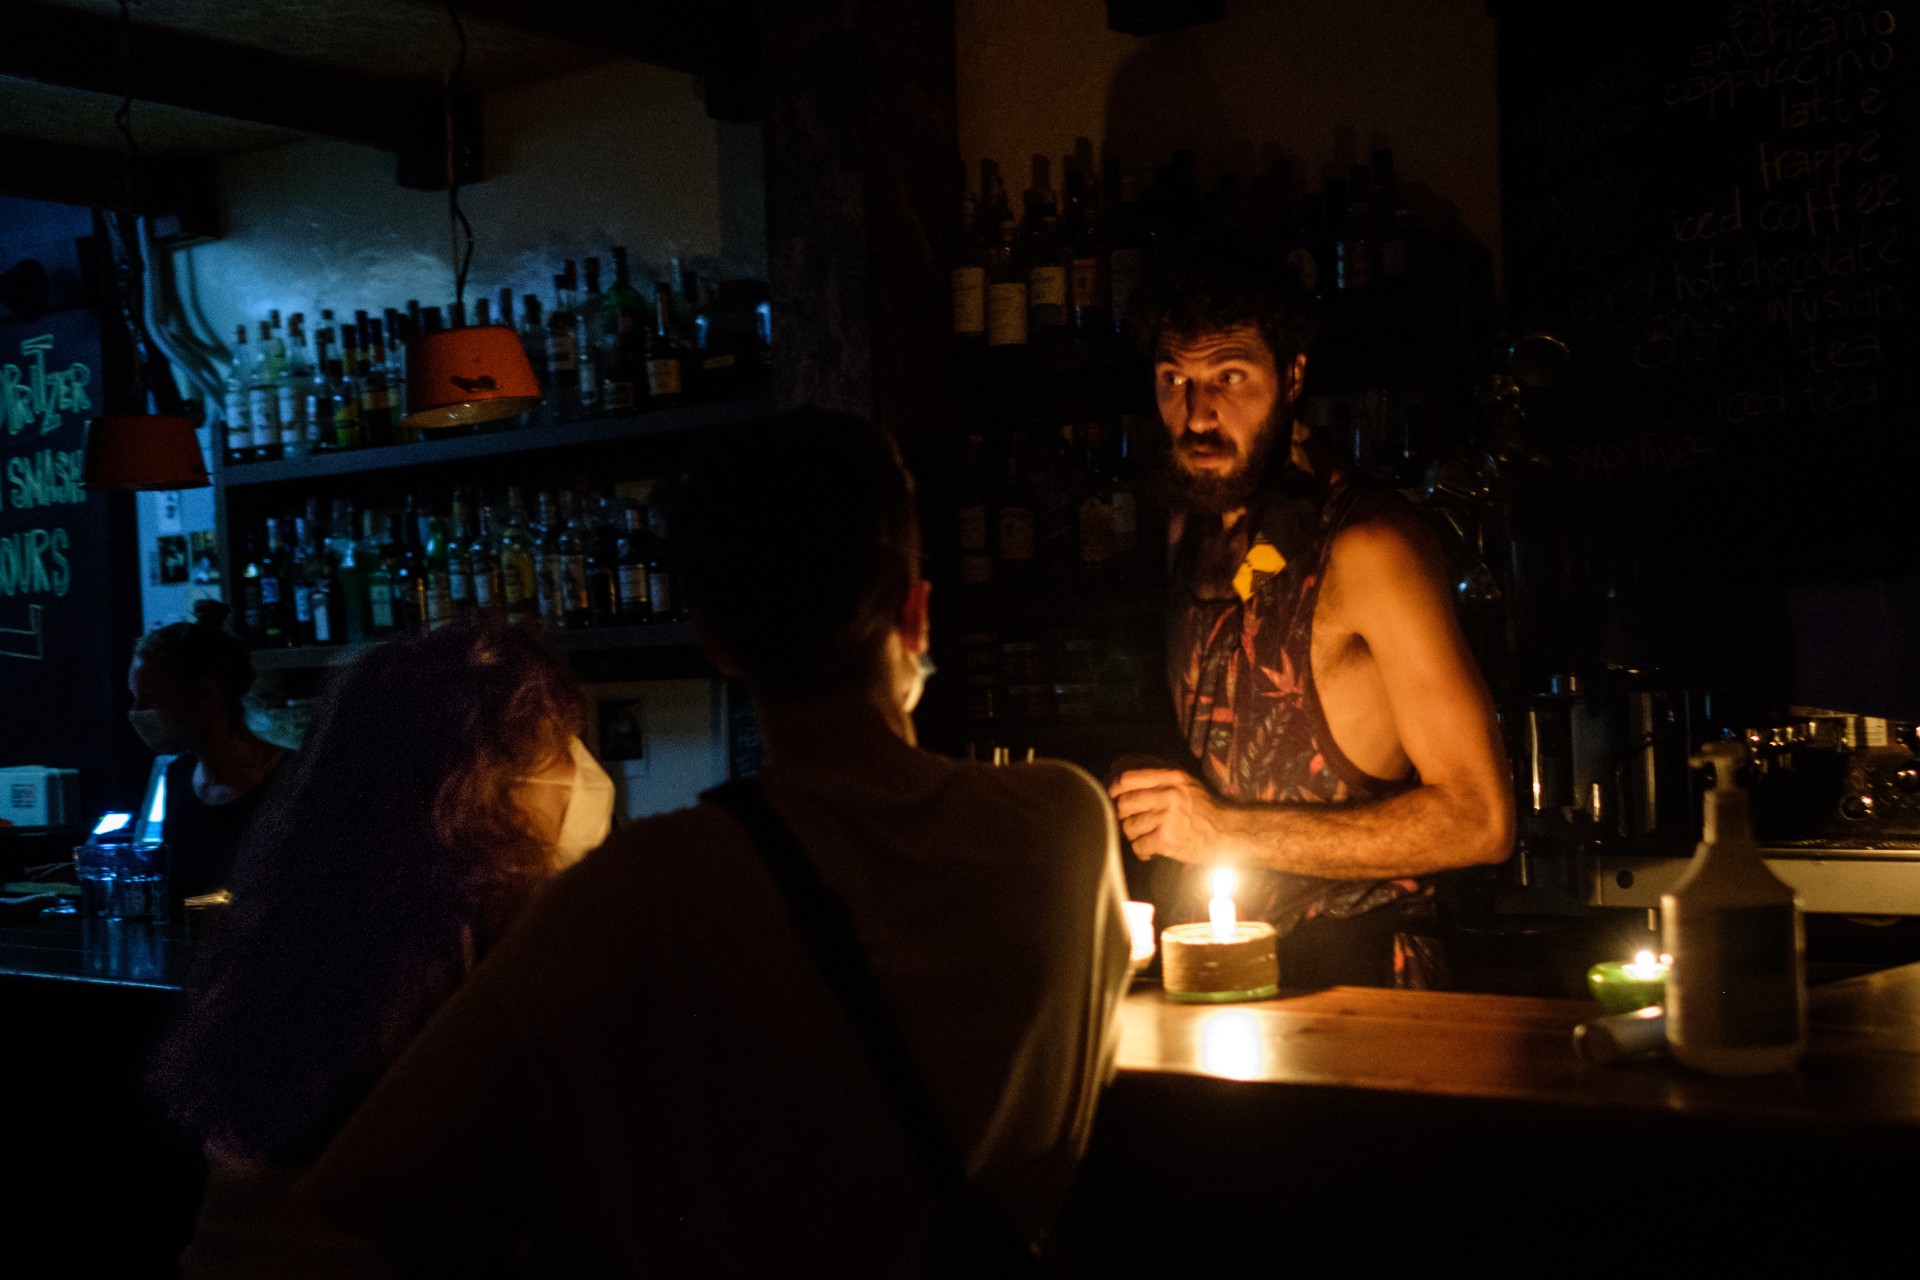 Demo Bar operates by candlelight between electricity outages. July 7, 2021 (MEE/Rita Kabalan)